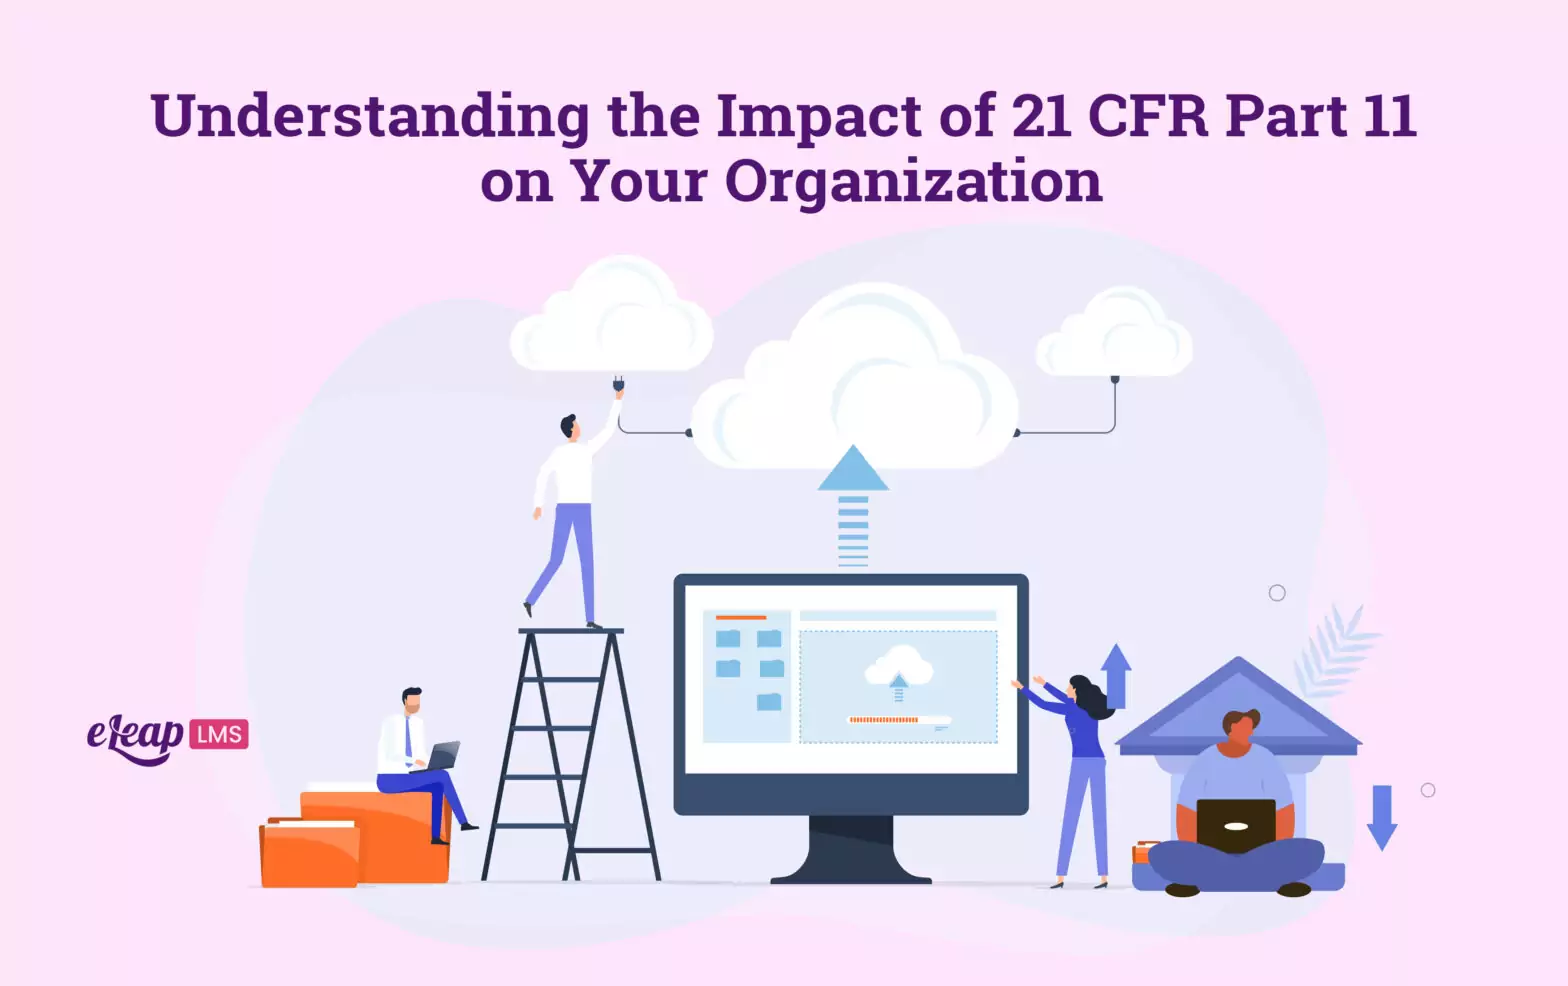 Understanding the Impact of 21 CFR Part 11 on Your Organization